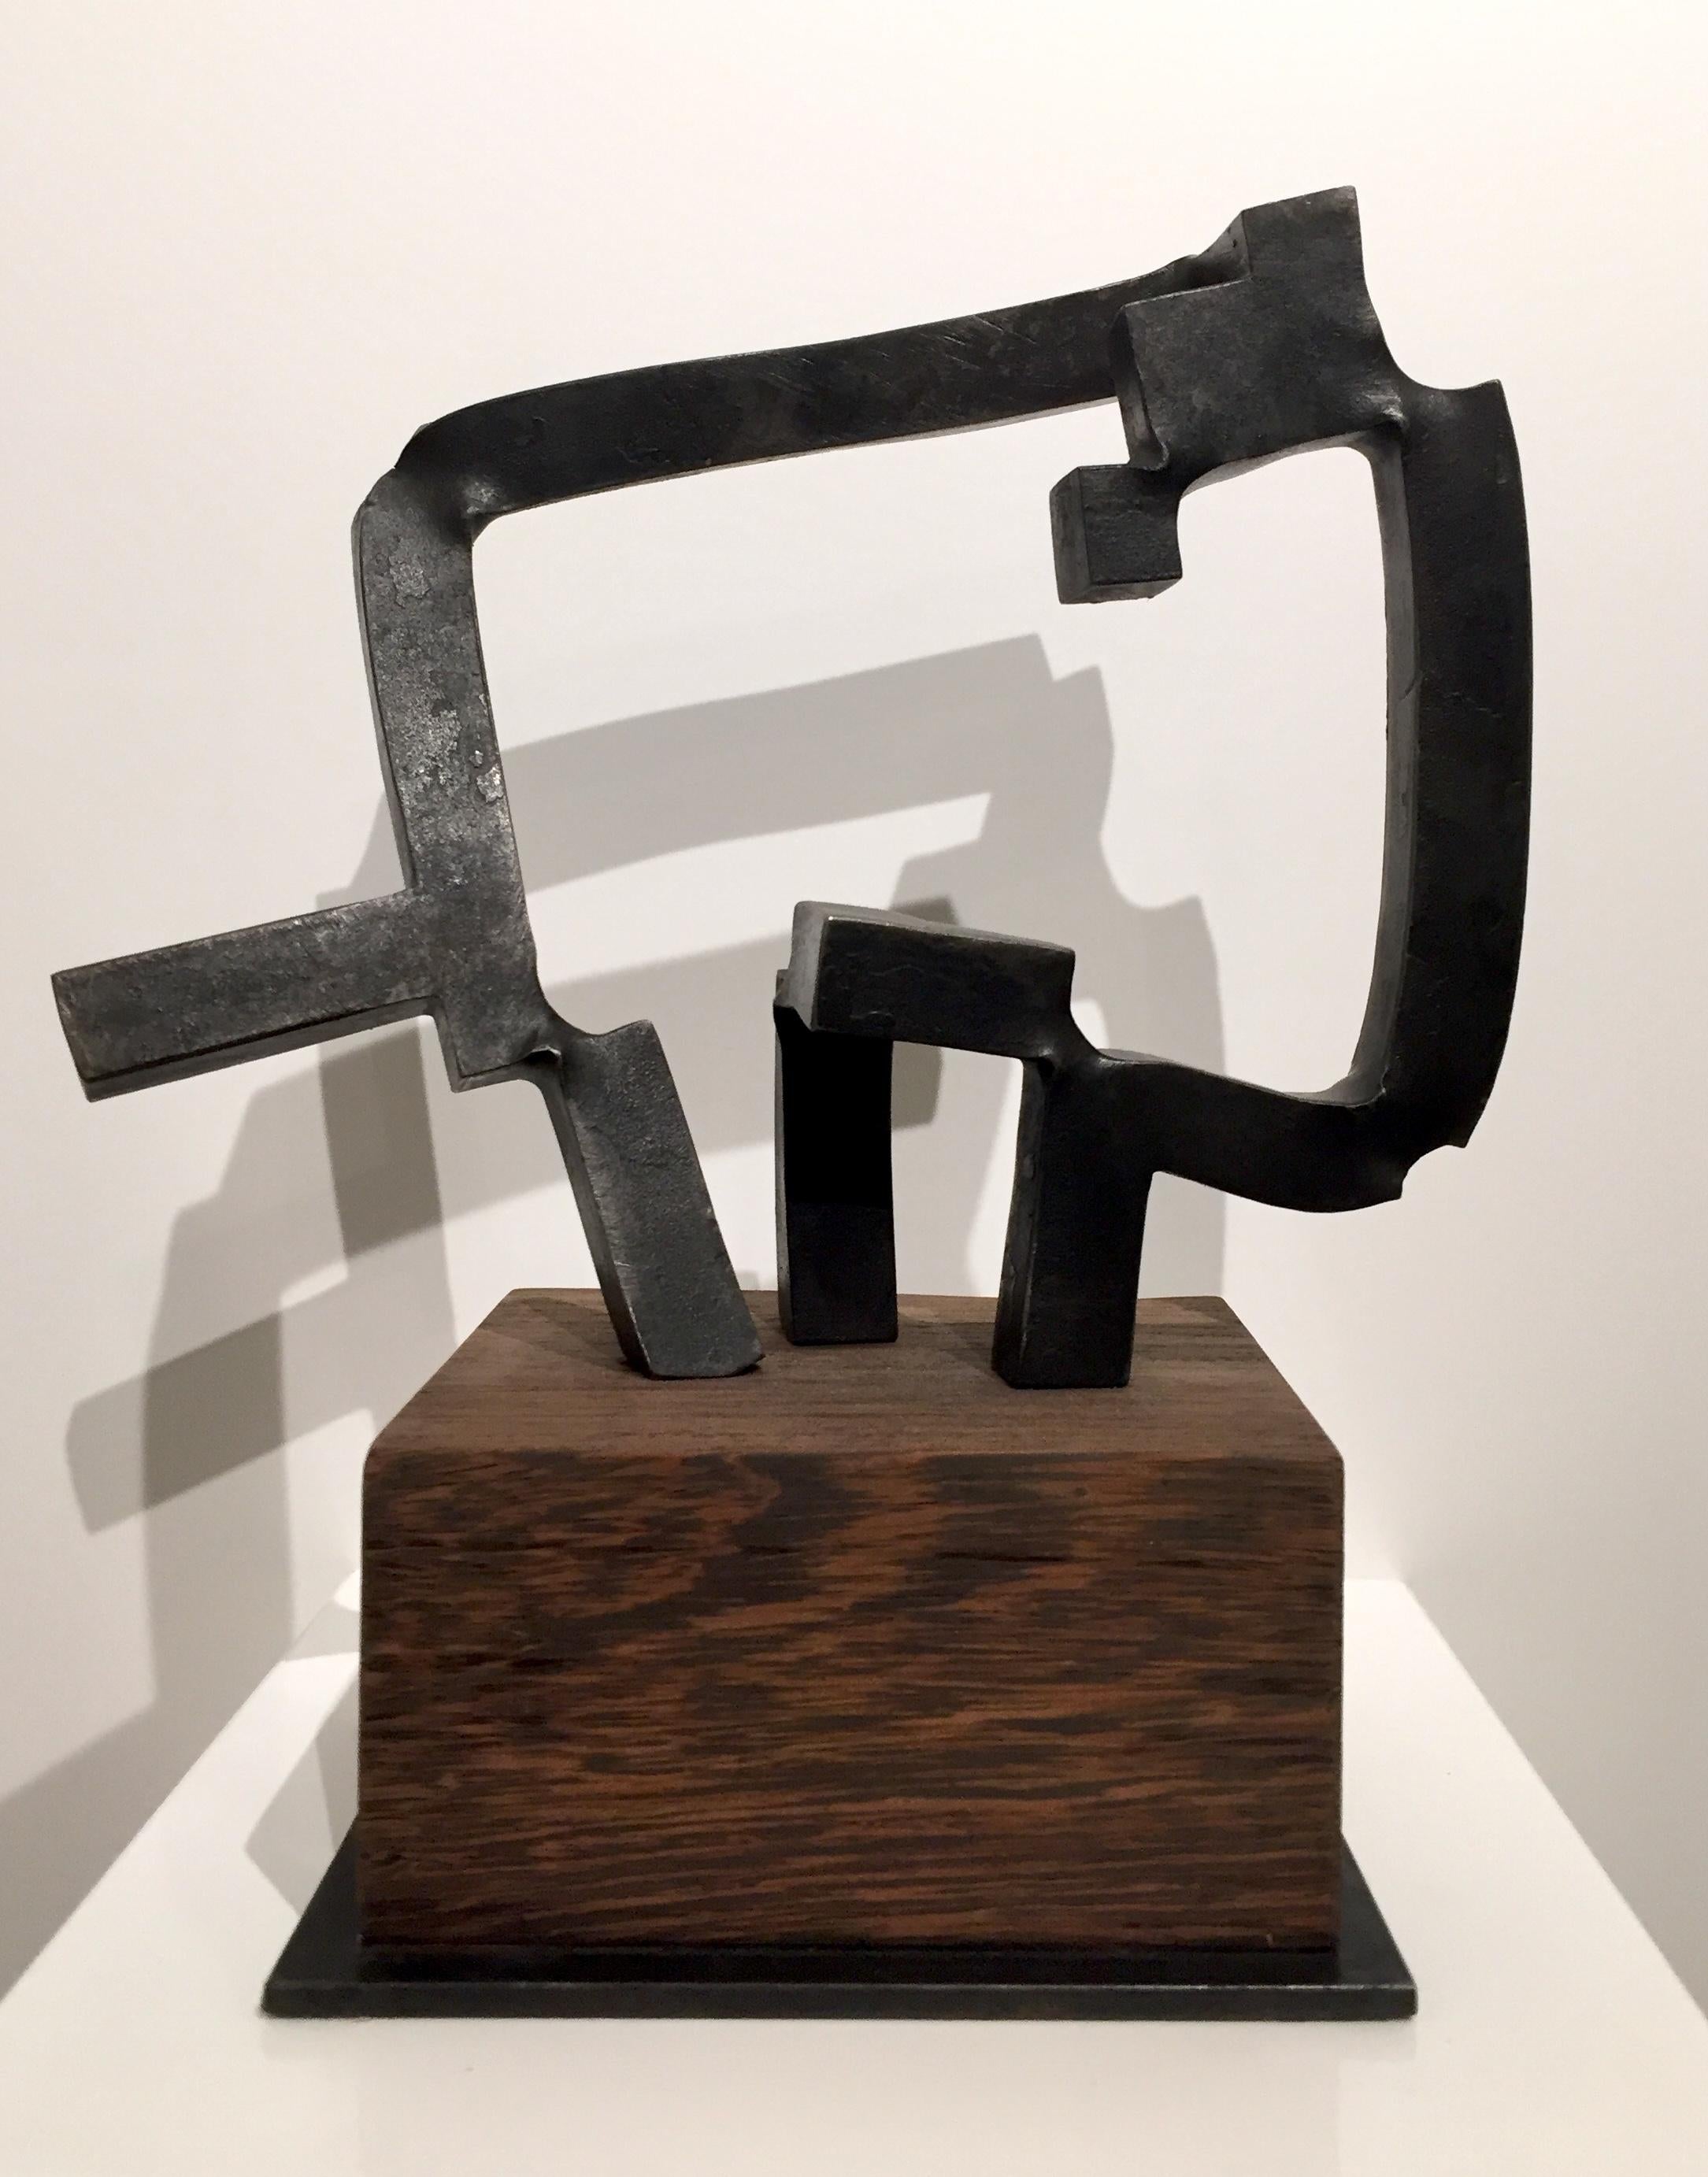 Carlos Albert, Abstract Expressionist Sculpture, Templanza, 2013 4